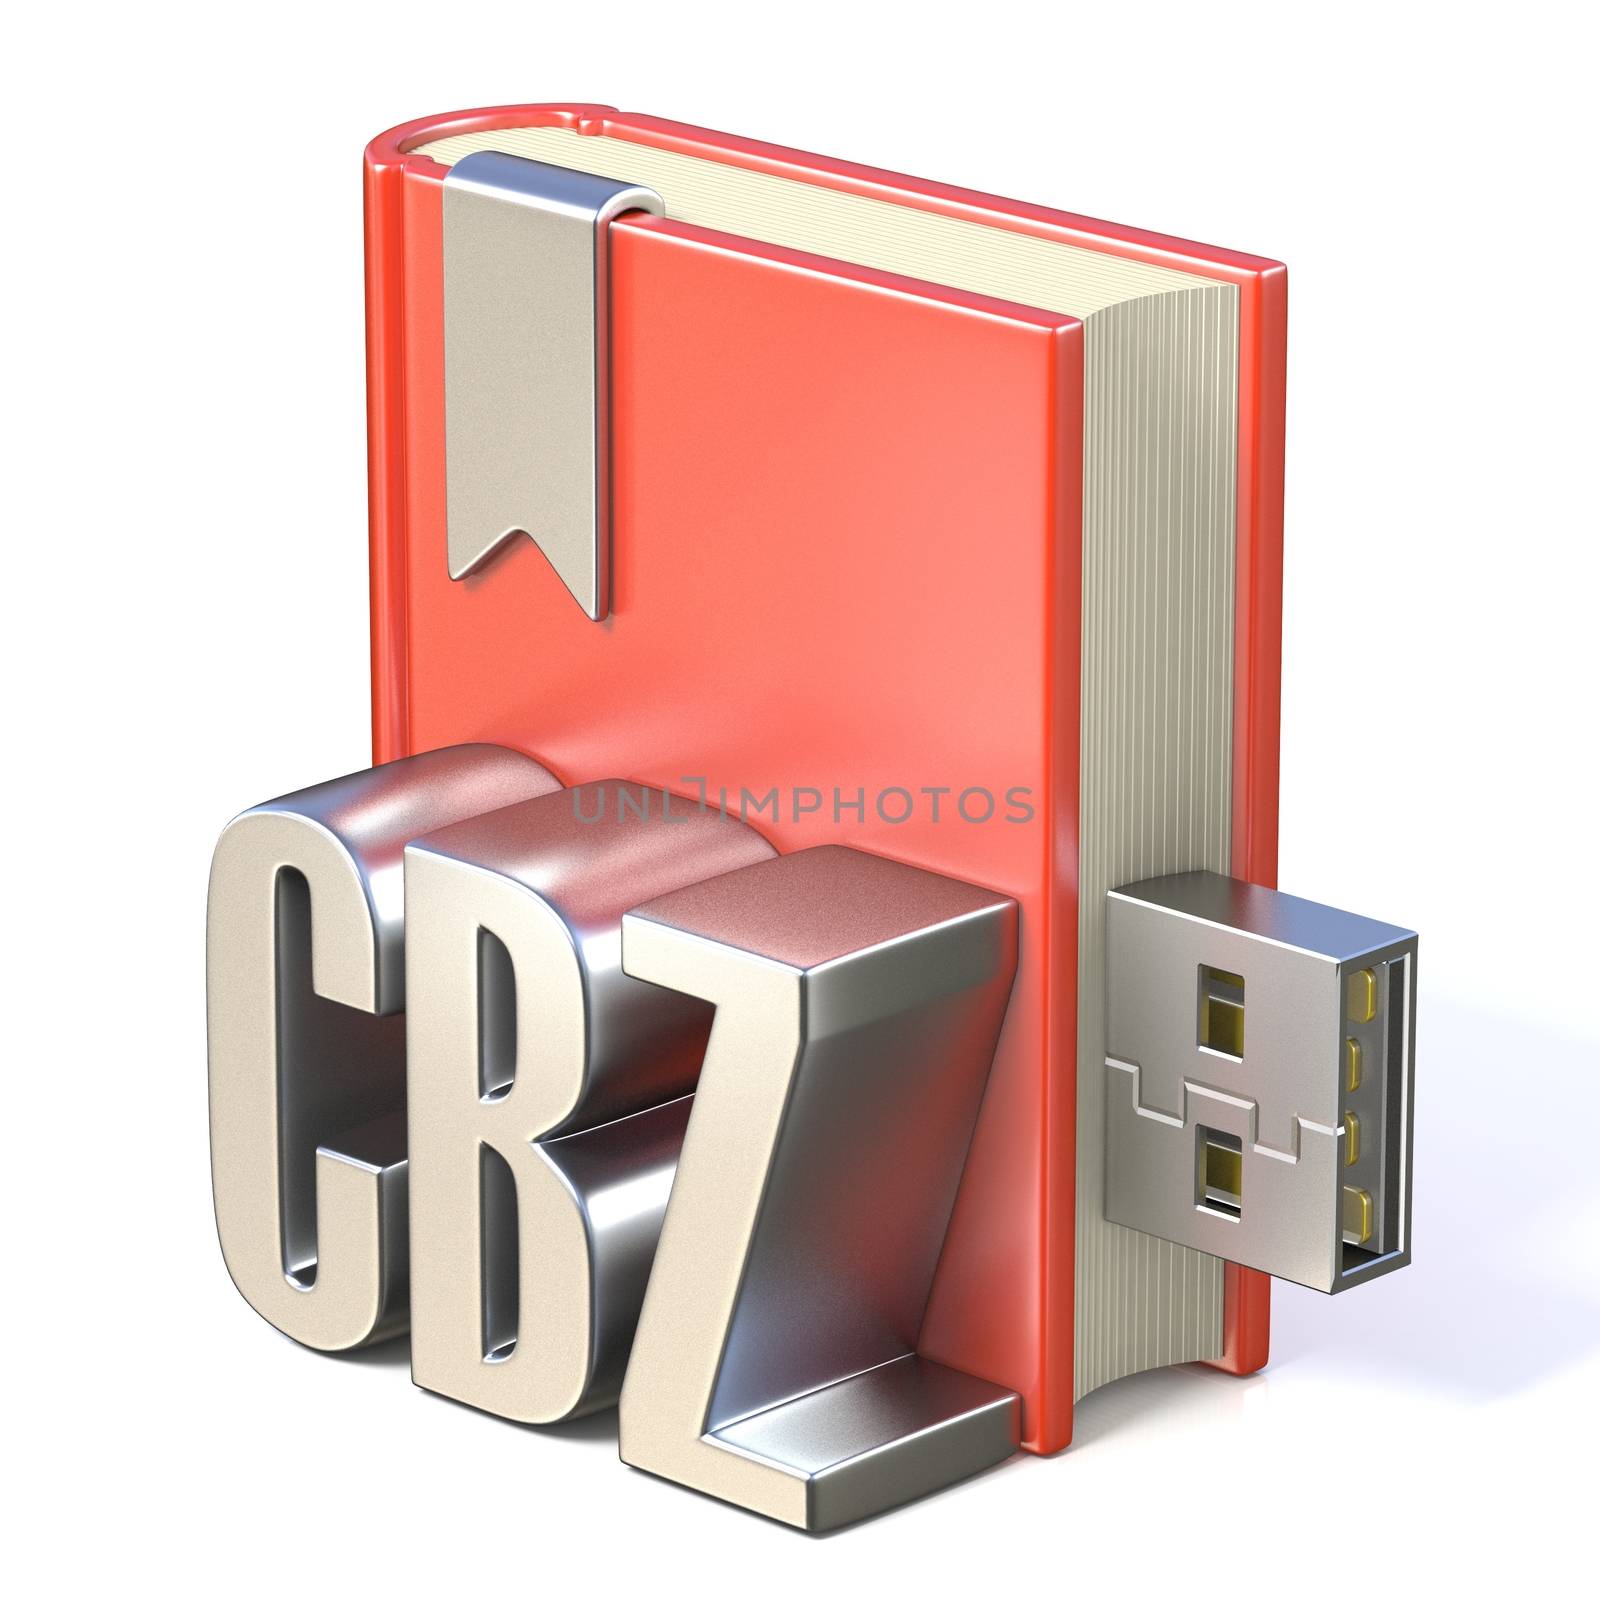 eBook icon metal CBZ red book USB 3D render illustration isolated on white background